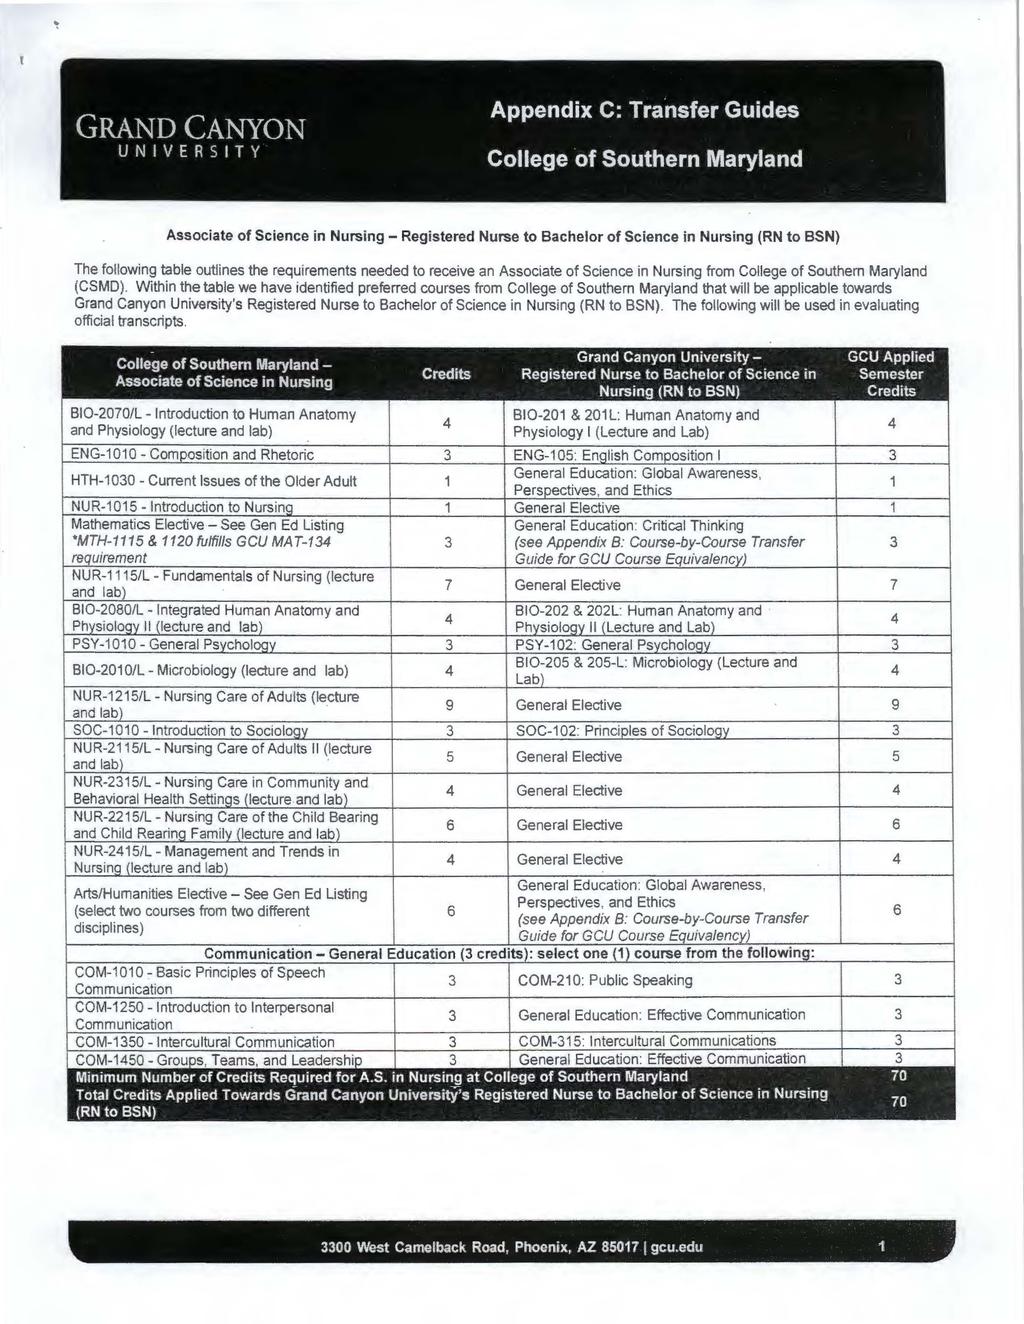 Associate of Science in Nursing - Registered Nurse to Bachelor of Science in Nursing (RN to BSN) The following table outlines the requirements needed to receive an Associate of Science in Nursing